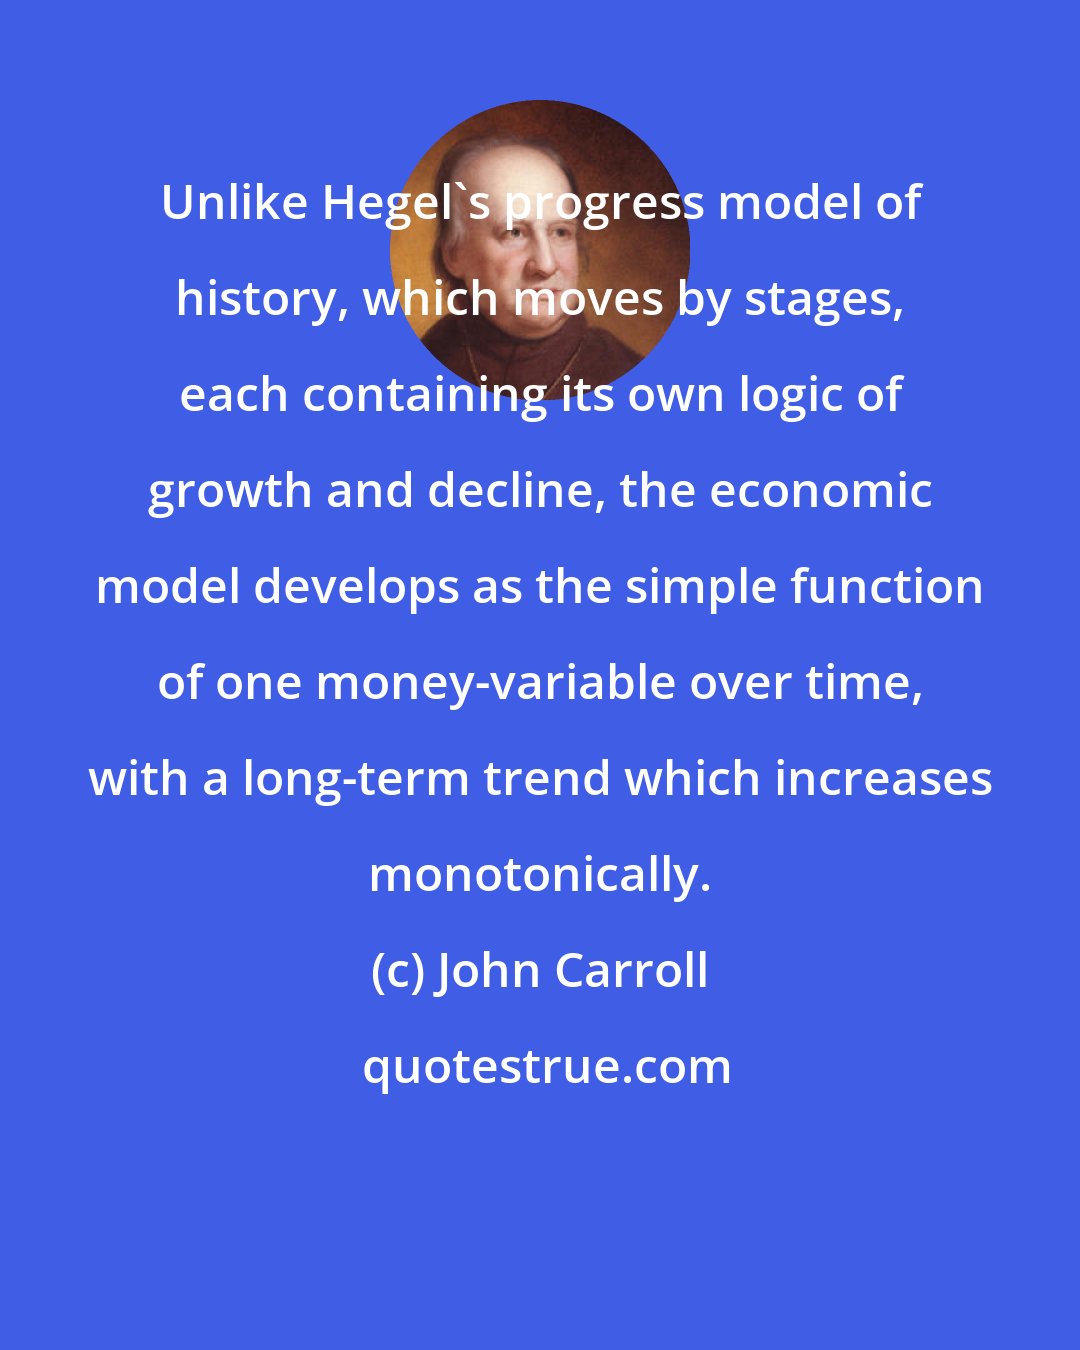 John Carroll: Unlike Hegel's progress model of history, which moves by stages, each containing its own logic of growth and decline, the economic model develops as the simple function of one money-variable over time, with a long-term trend which increases monotonically.